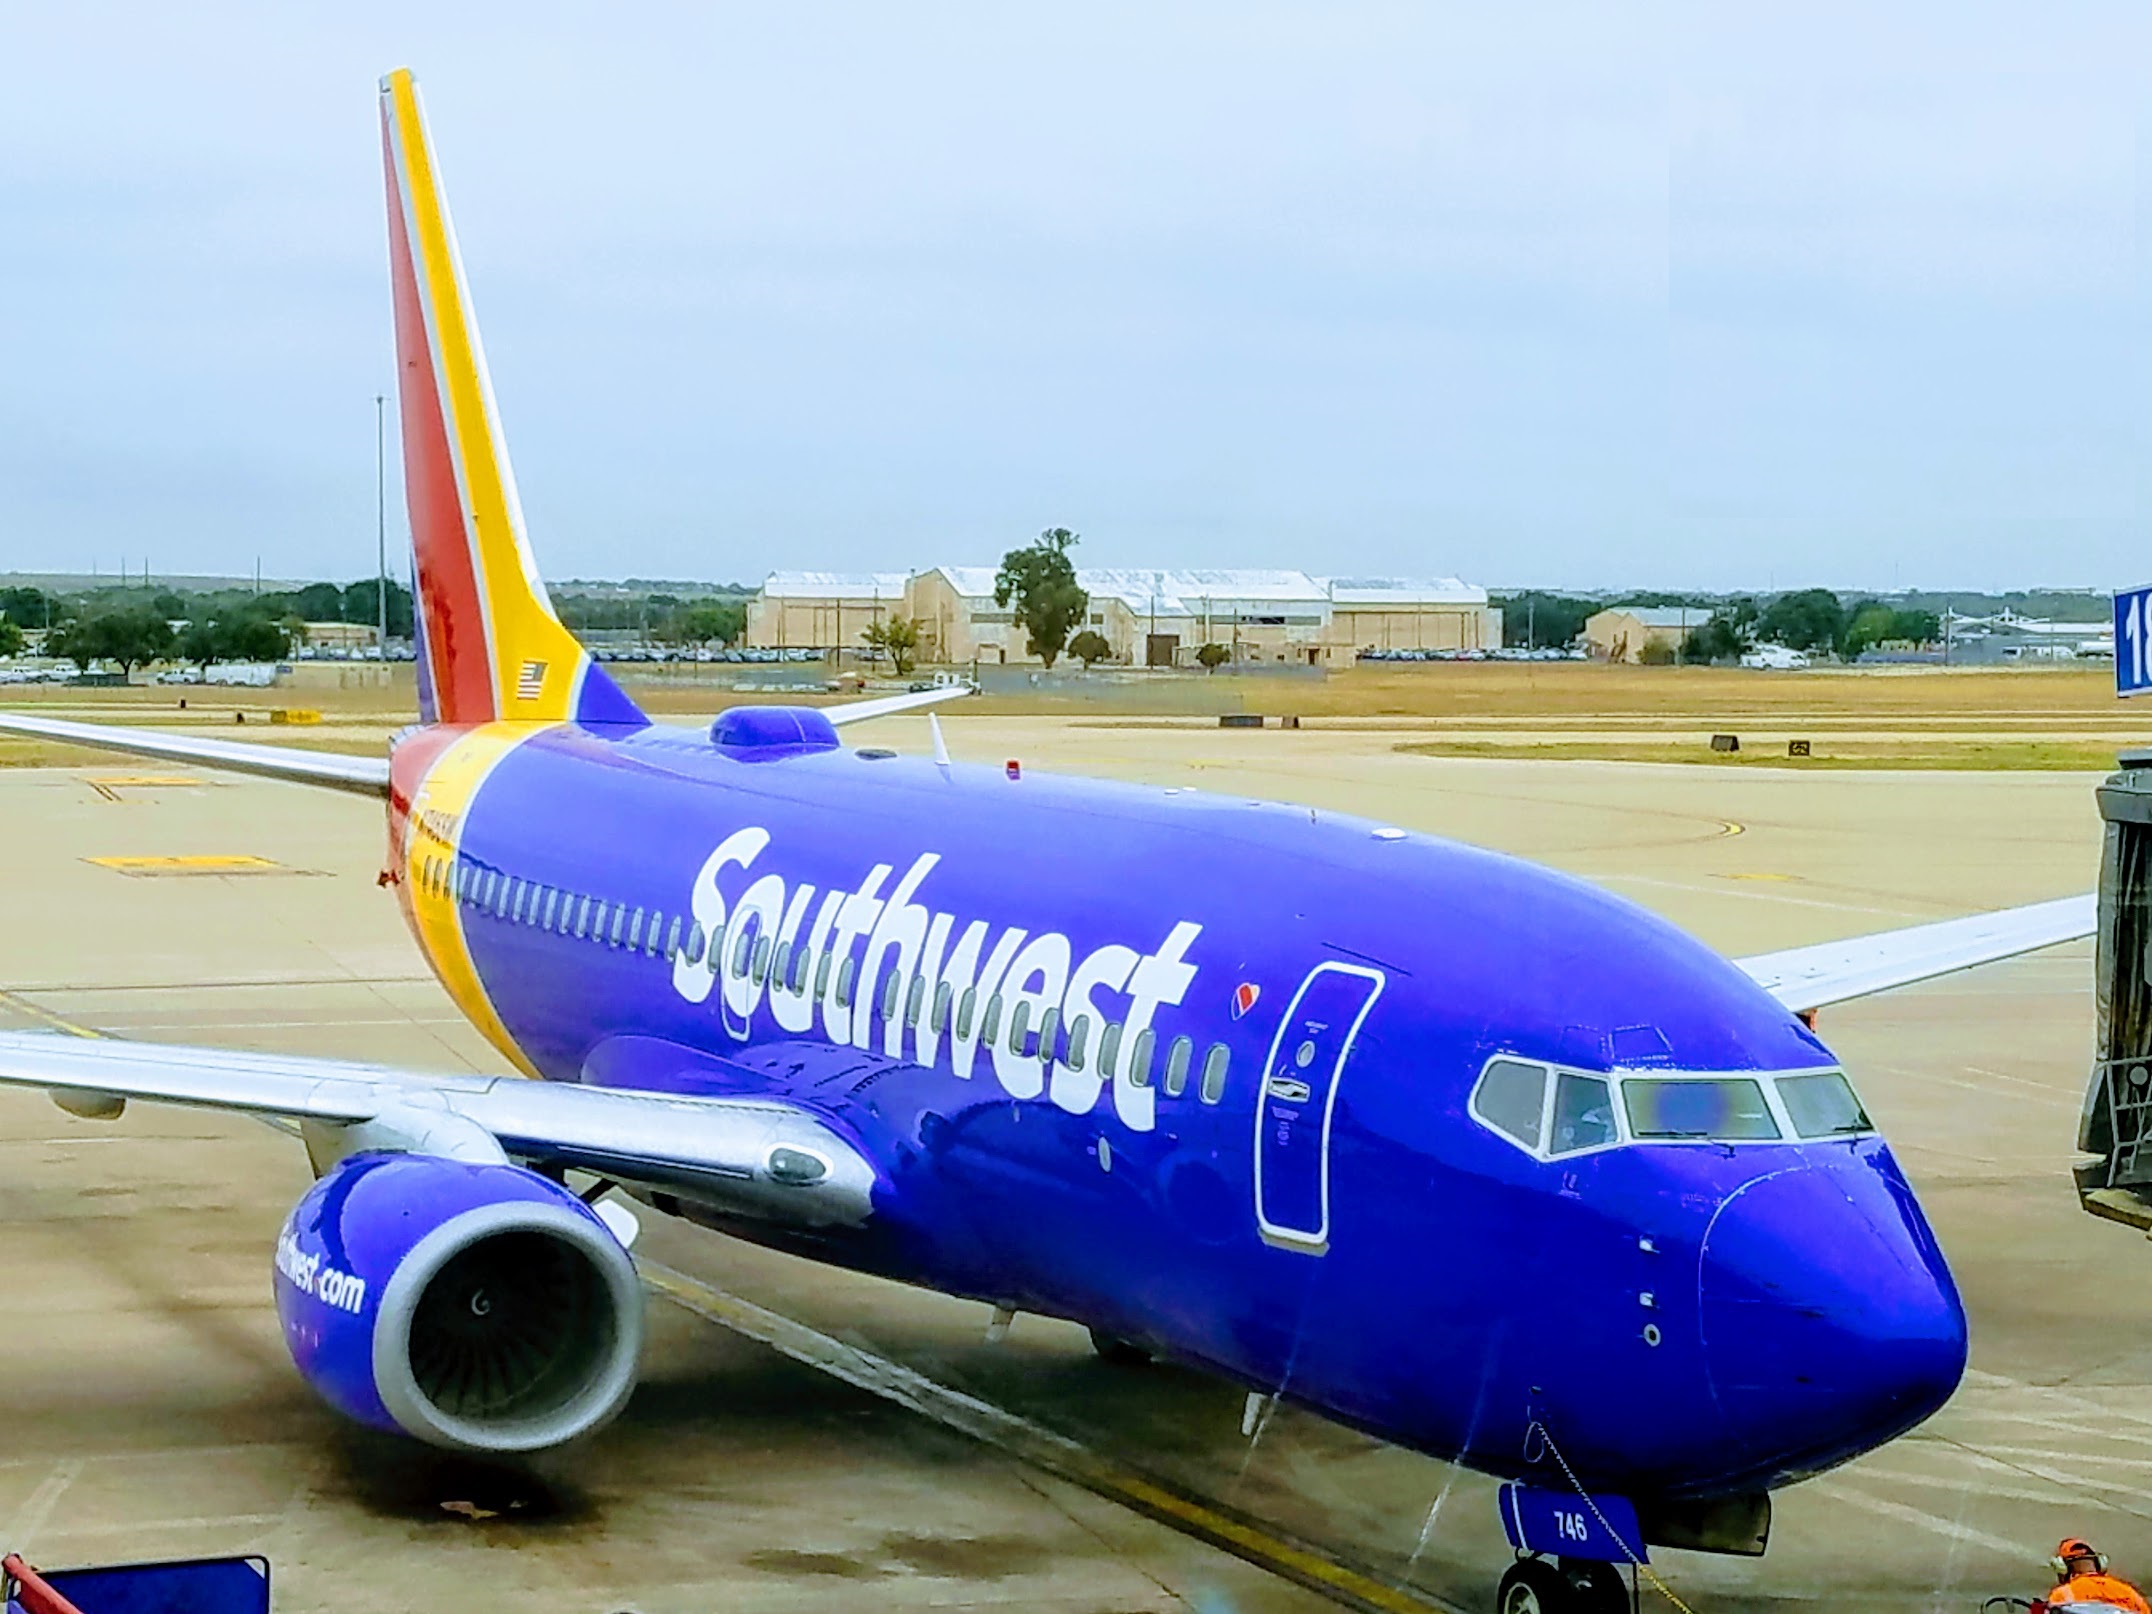 With Southwest Airlines In Disarray, Its Phone Systems Melt Down